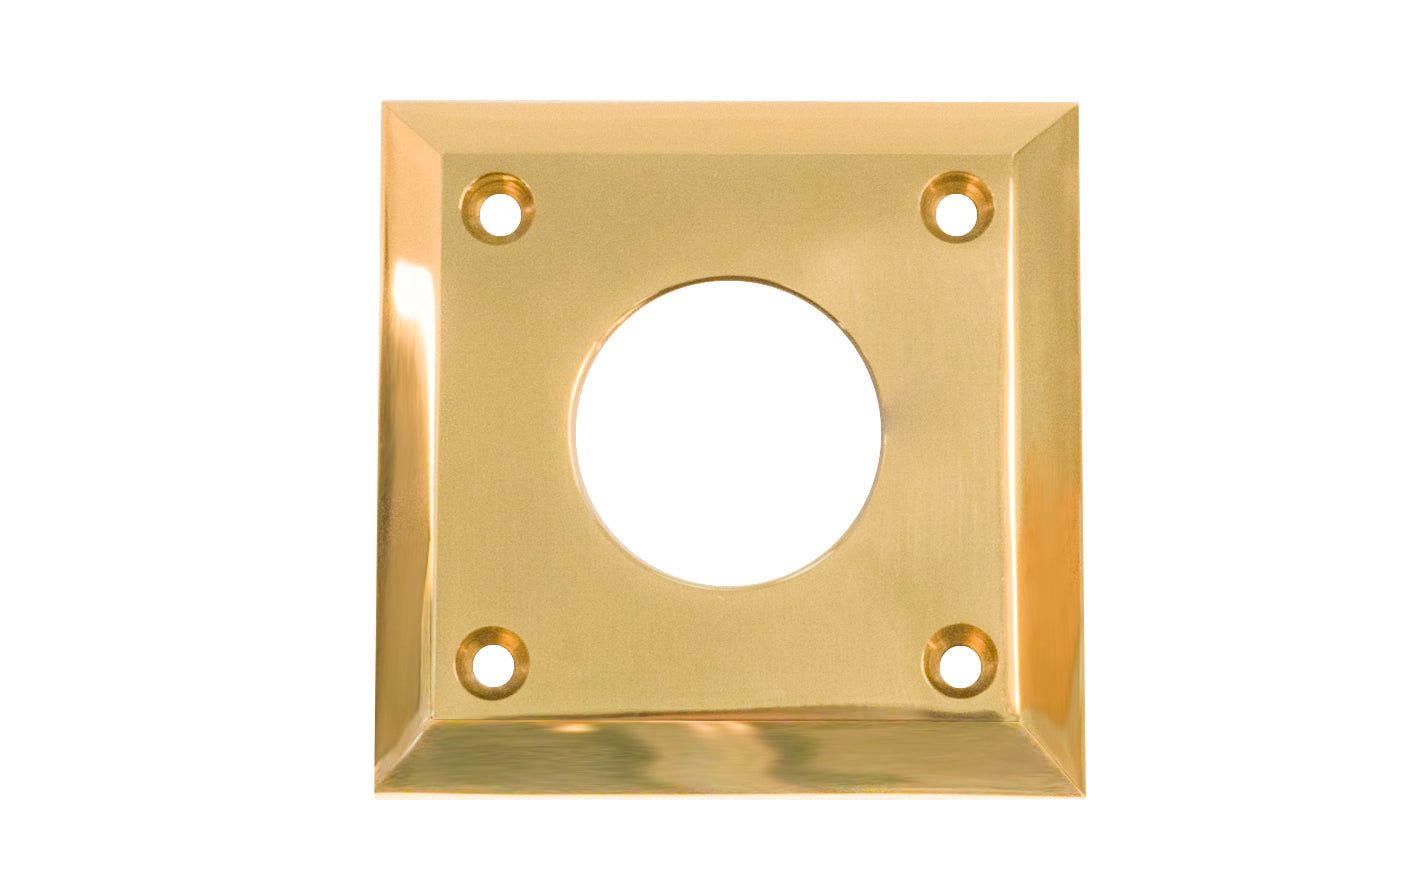 Solid brass square shape cylinder collar designed for exterior doors that take mortise lock with keyed cylinder. Includes fasteners (keyway cylinder sold separately). Unlacquered (non-lacquered) brass (will patina and age over time)